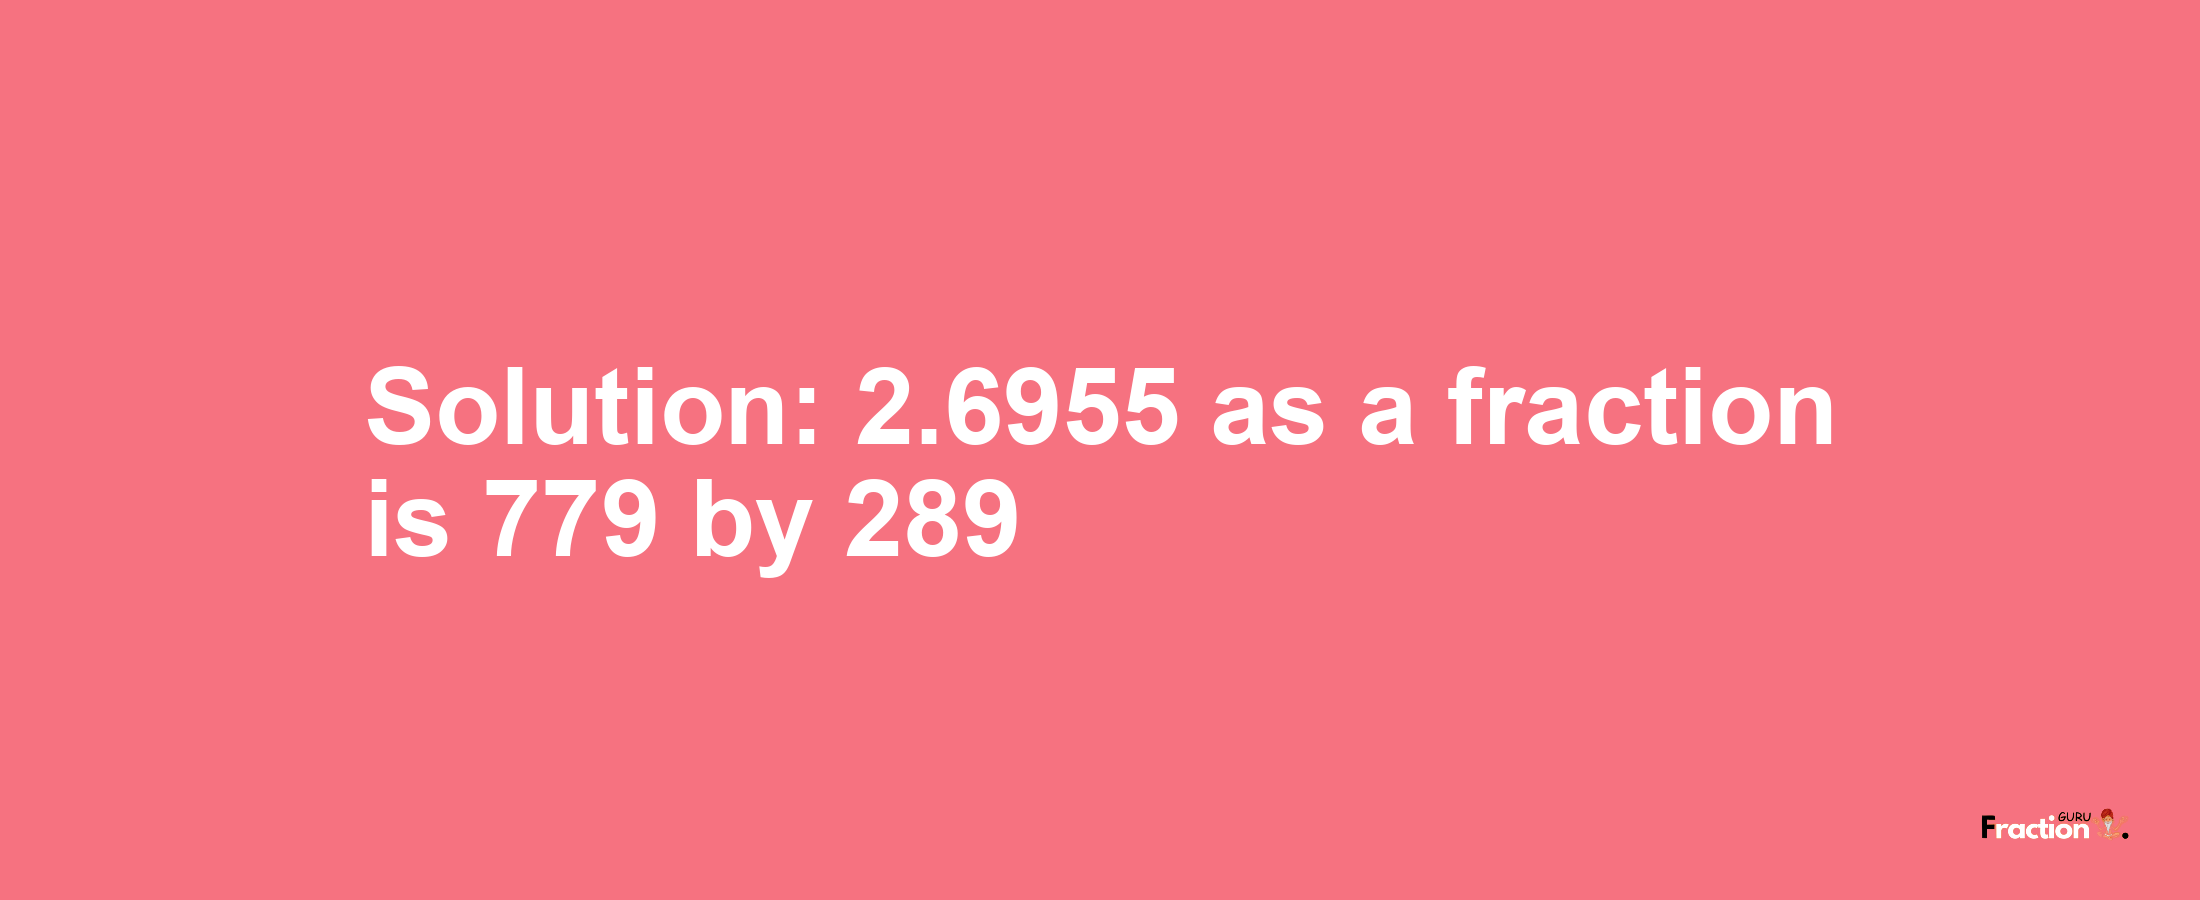 Solution:2.6955 as a fraction is 779/289